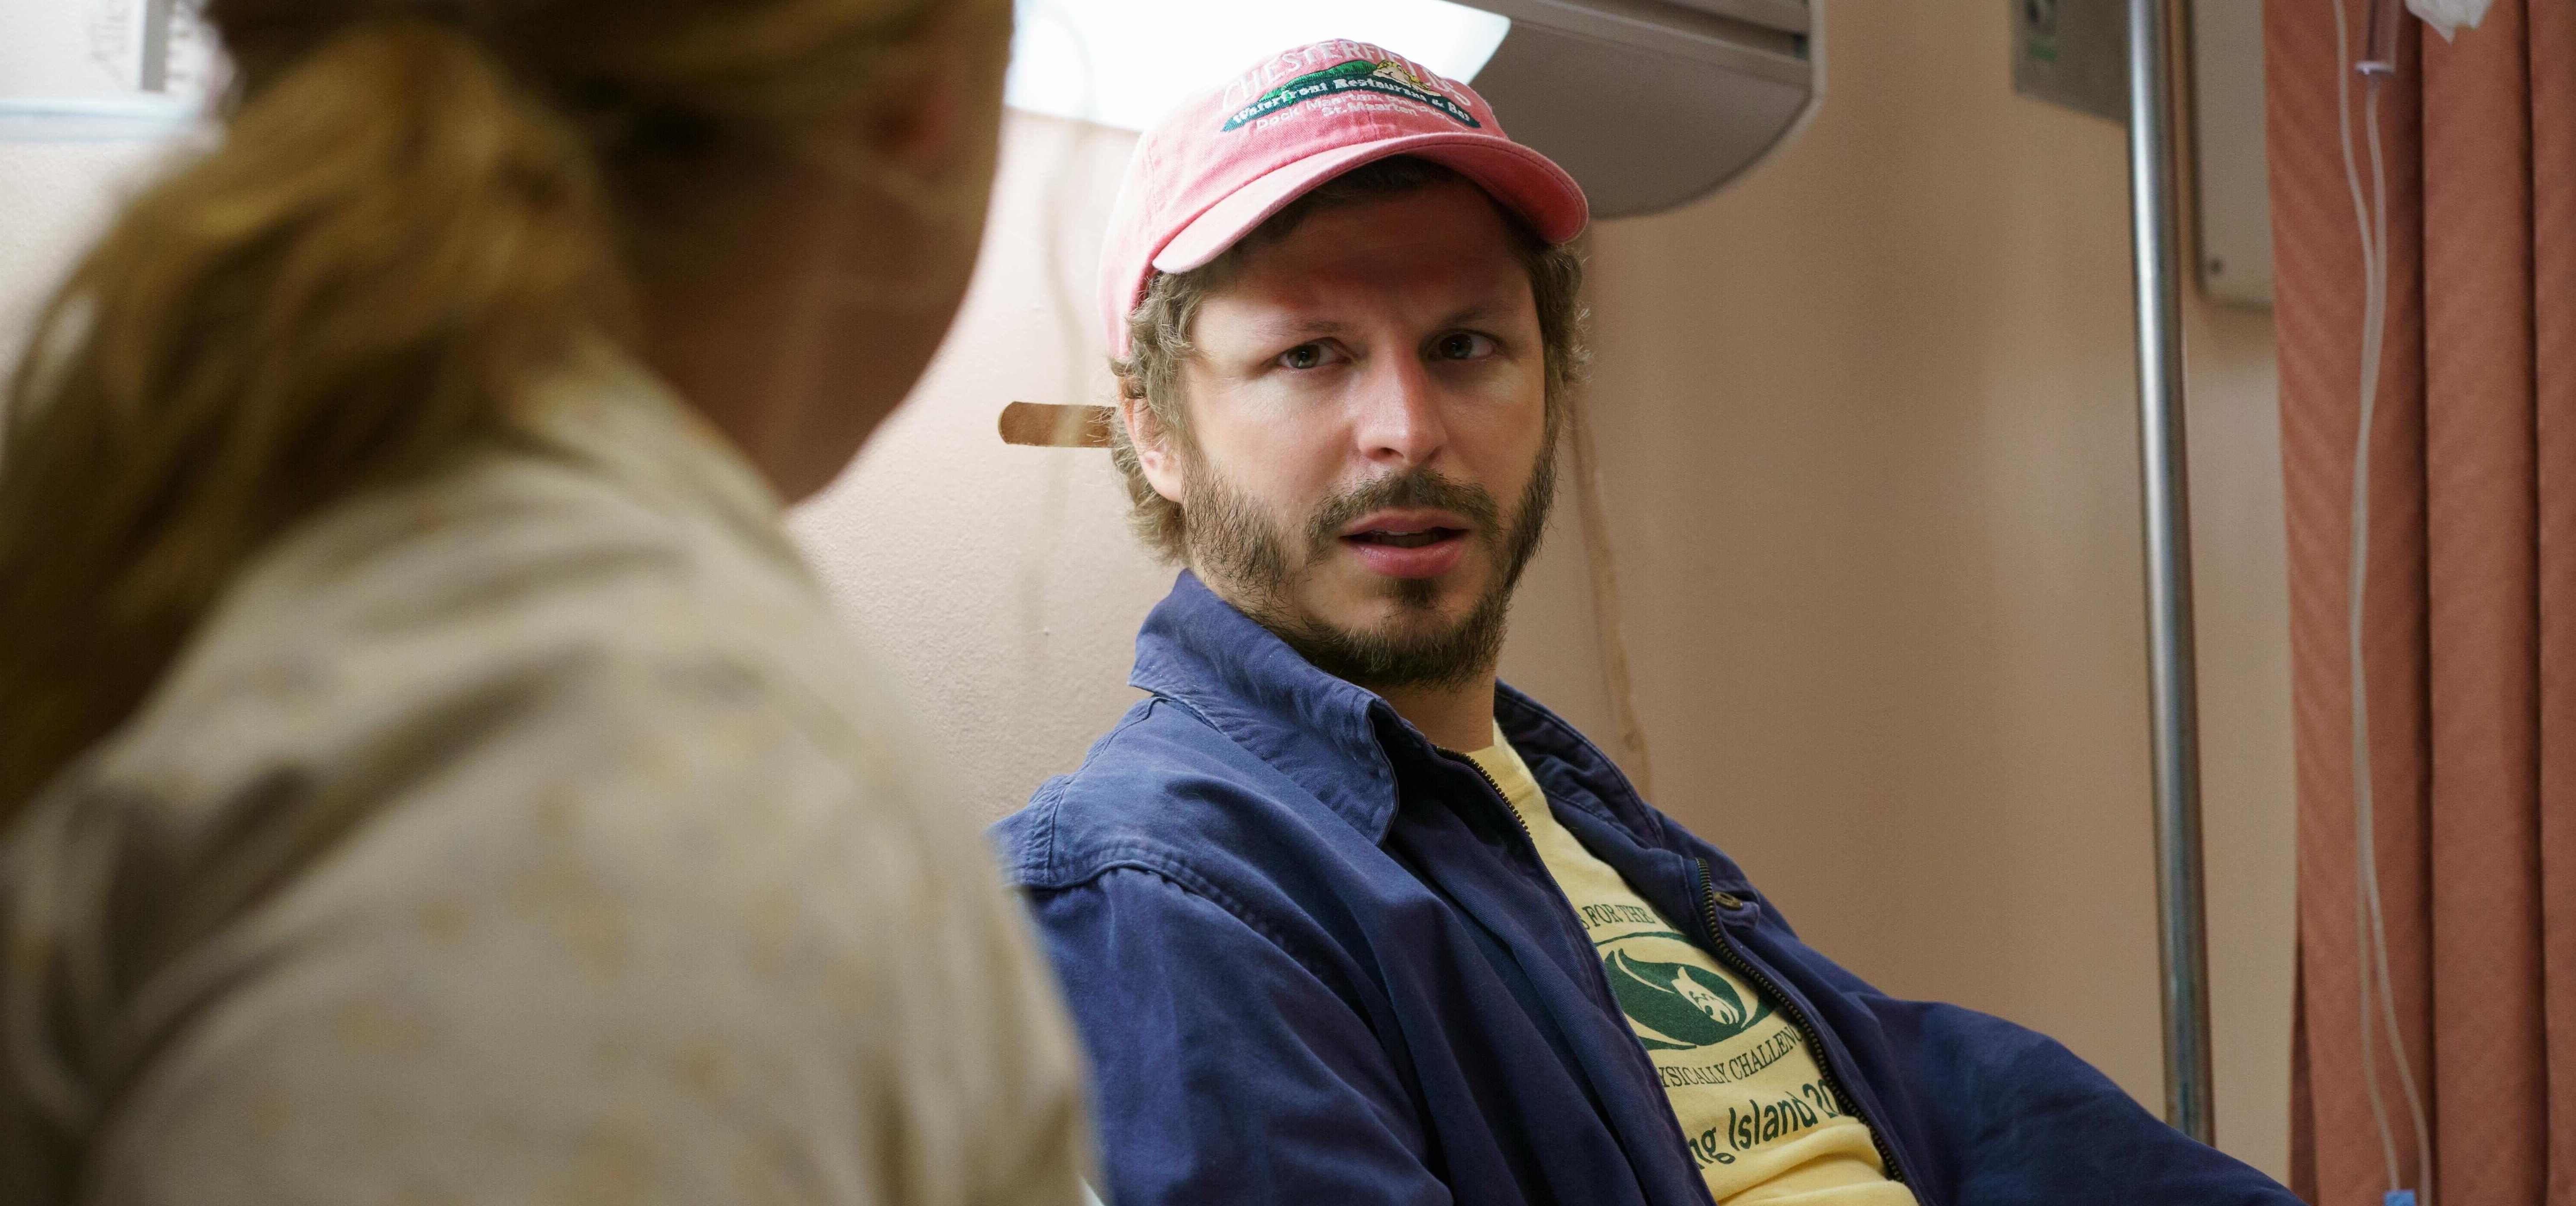 Wes Anderson’s Michael Cera Film to be Shot in the UK